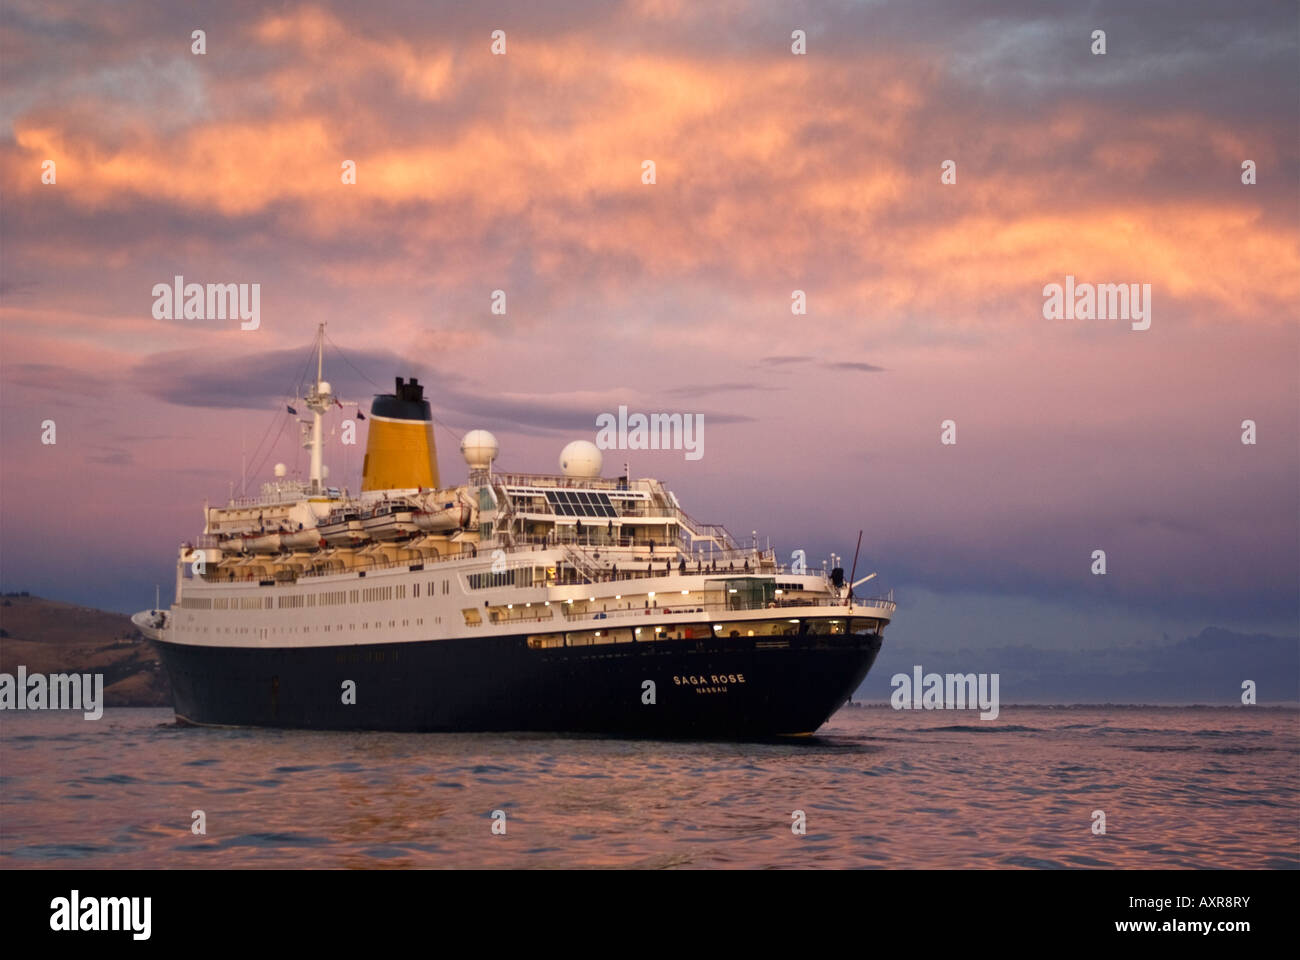 A cruise ship arrives at the entrance to Lyttelton Harbour, New Zealand, at sunrise. Stock Photo